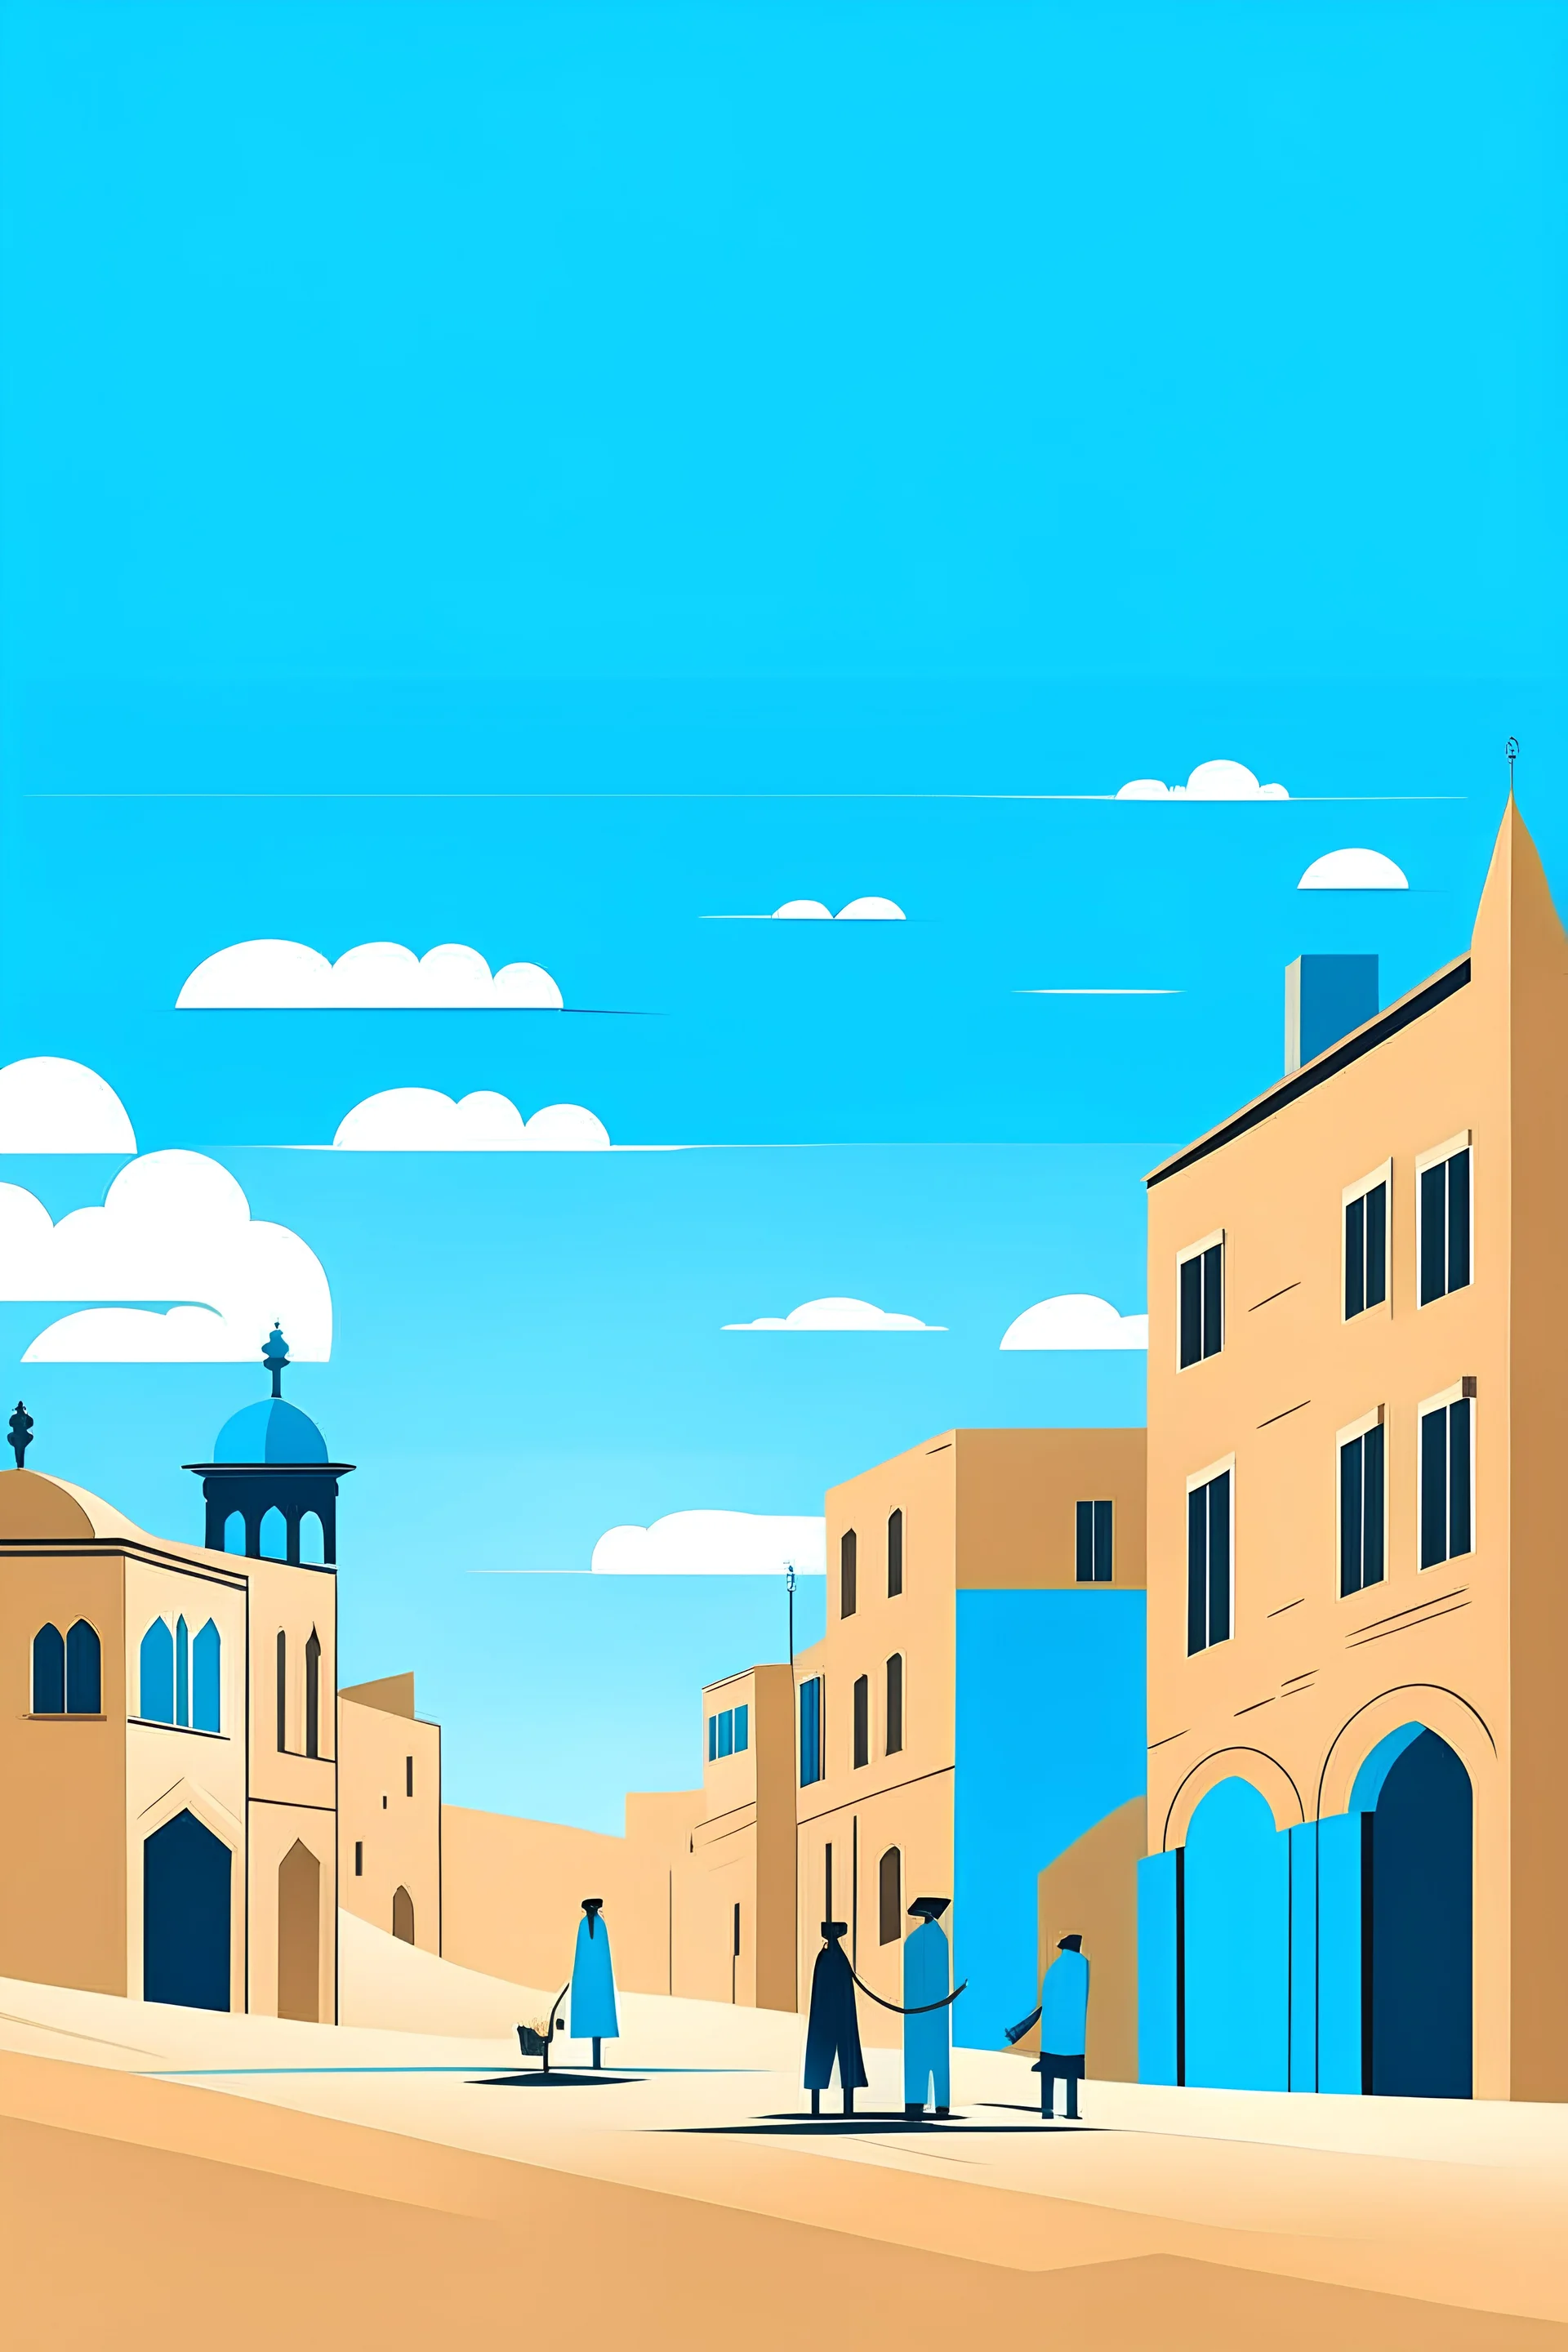 Create a clear and atmospheric very simple vector about a cityscape located in persia in ancient times desert environment Emphasize the dusty and sandy streets that have no sidewalks, featuring mostly dirt roads. Illustrate a simple brick building with a minimalist, box-like facade, and depict the building with very smiling people in the background. Capture the unique atmosphere of the city with blue sky